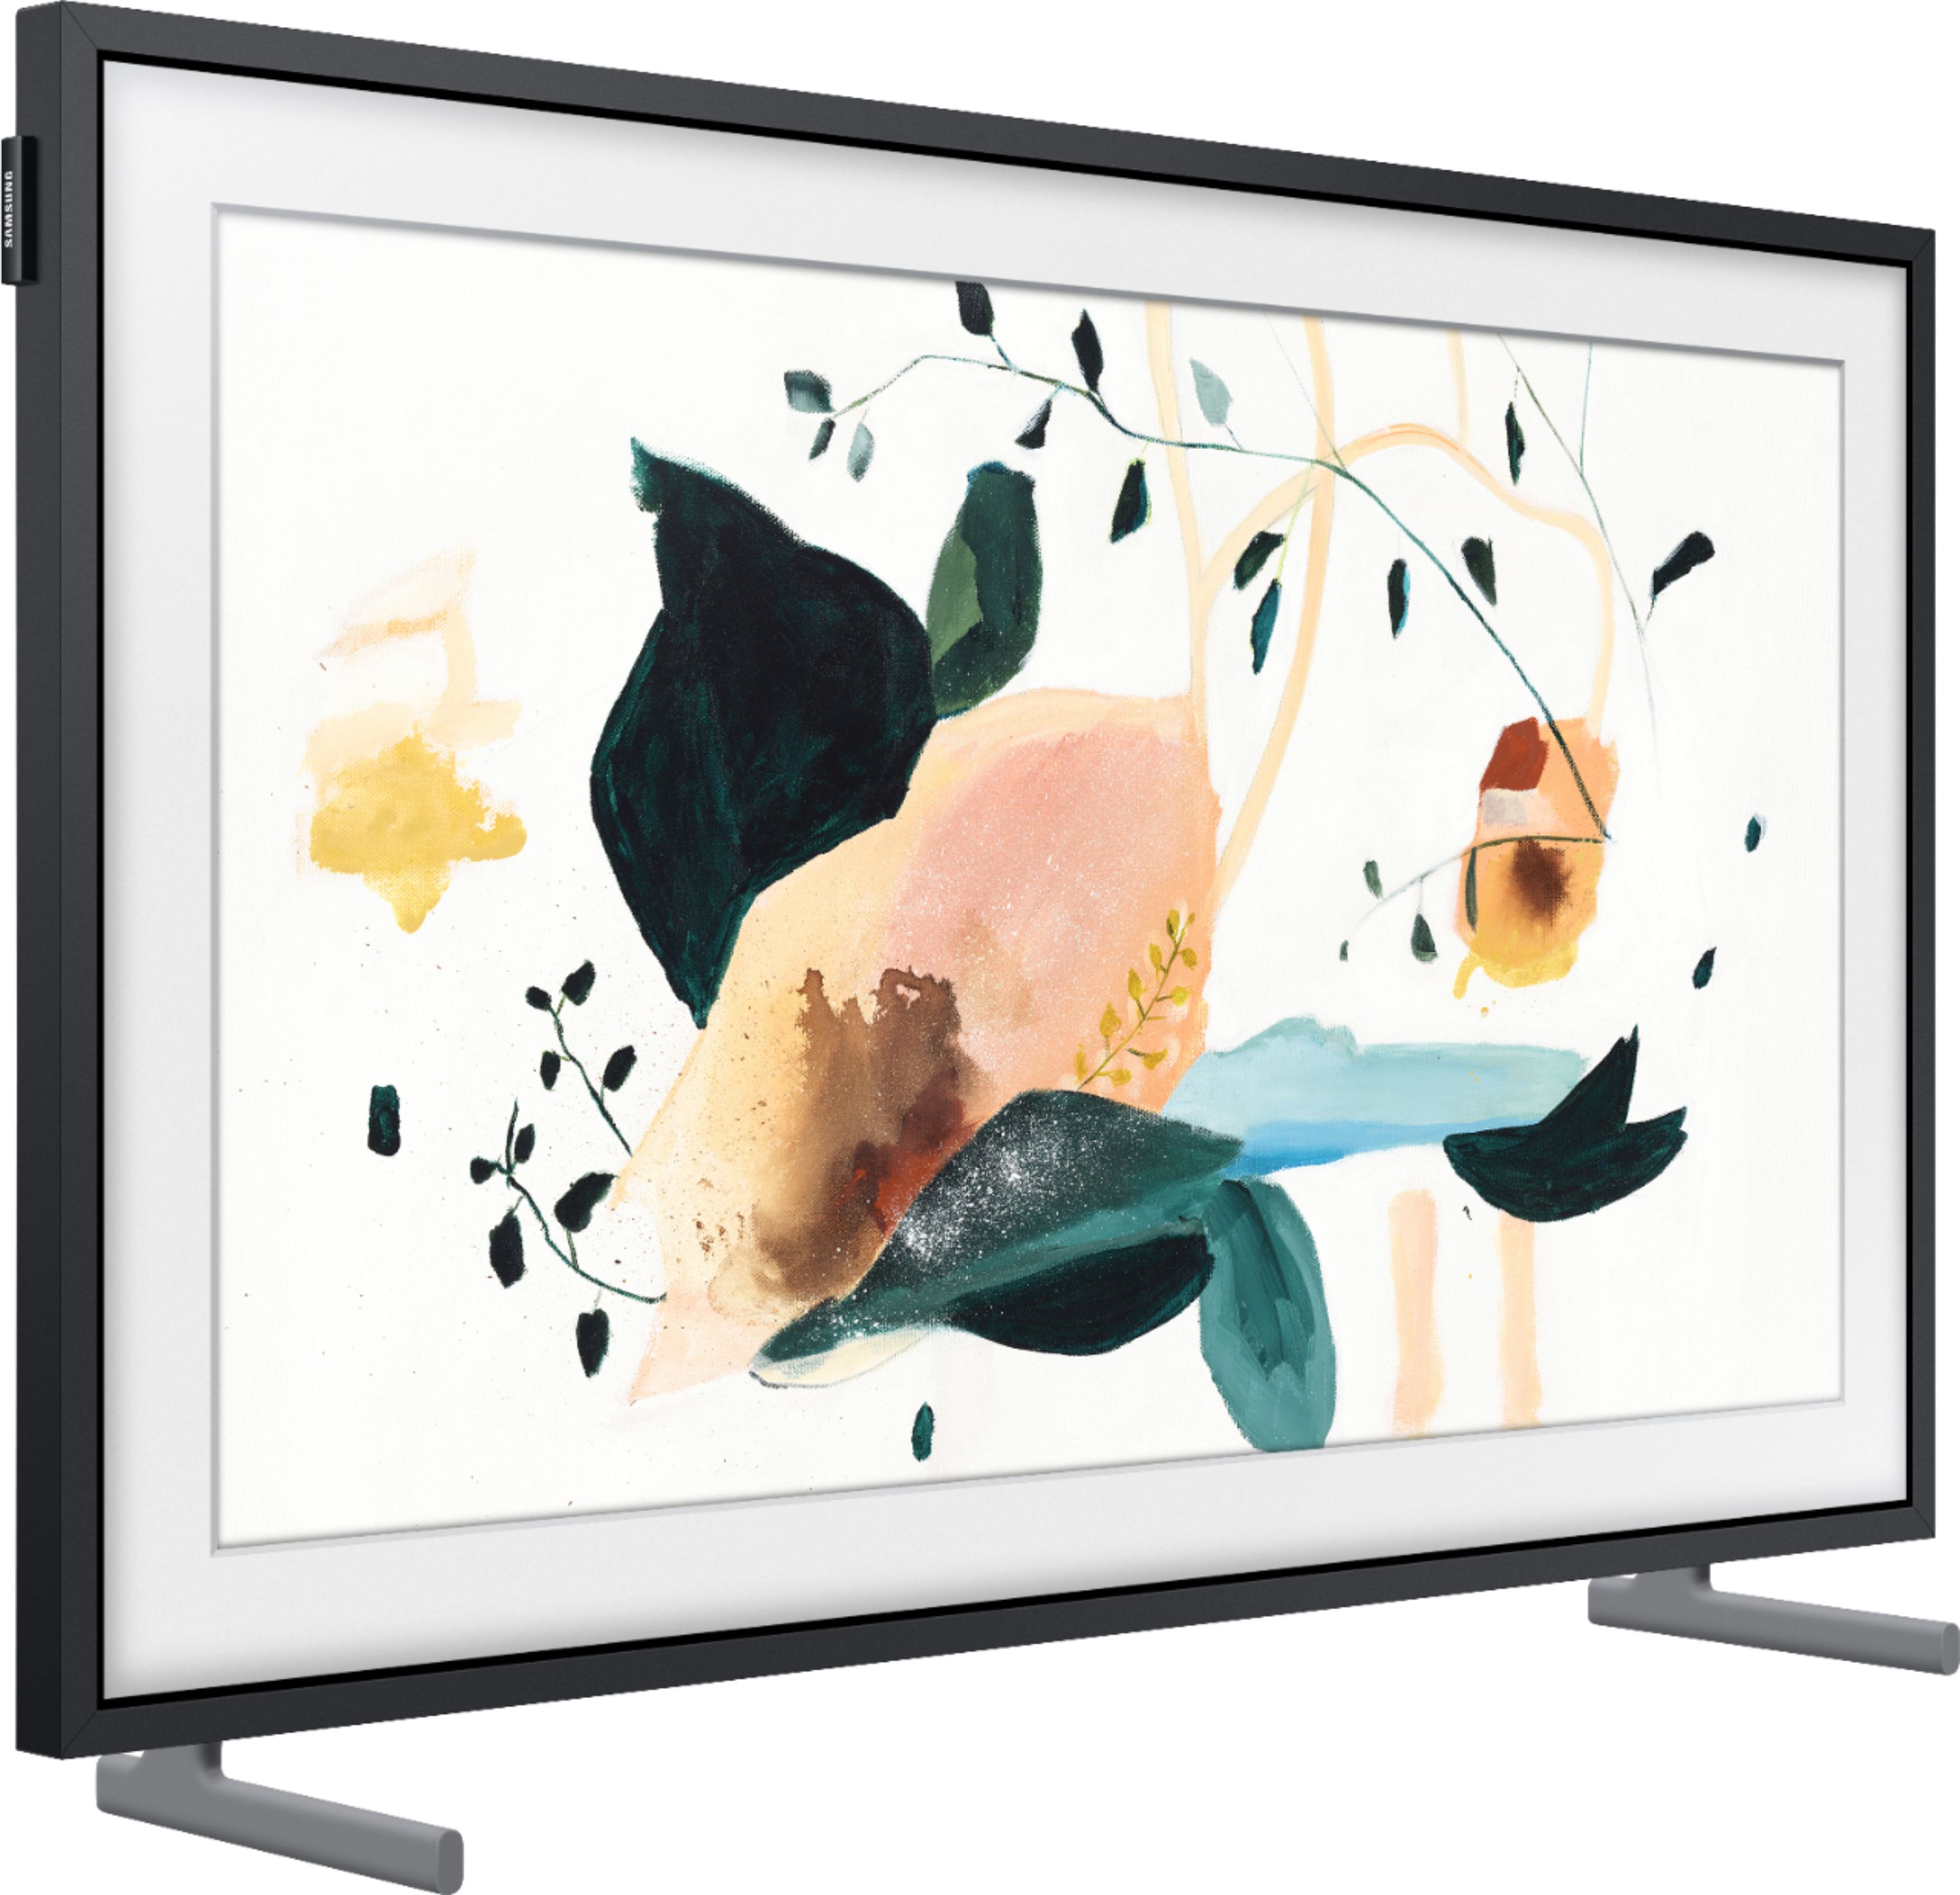 Angle View: Samsung - 32" Class The Frame Series Full HD Smart Tizen TV